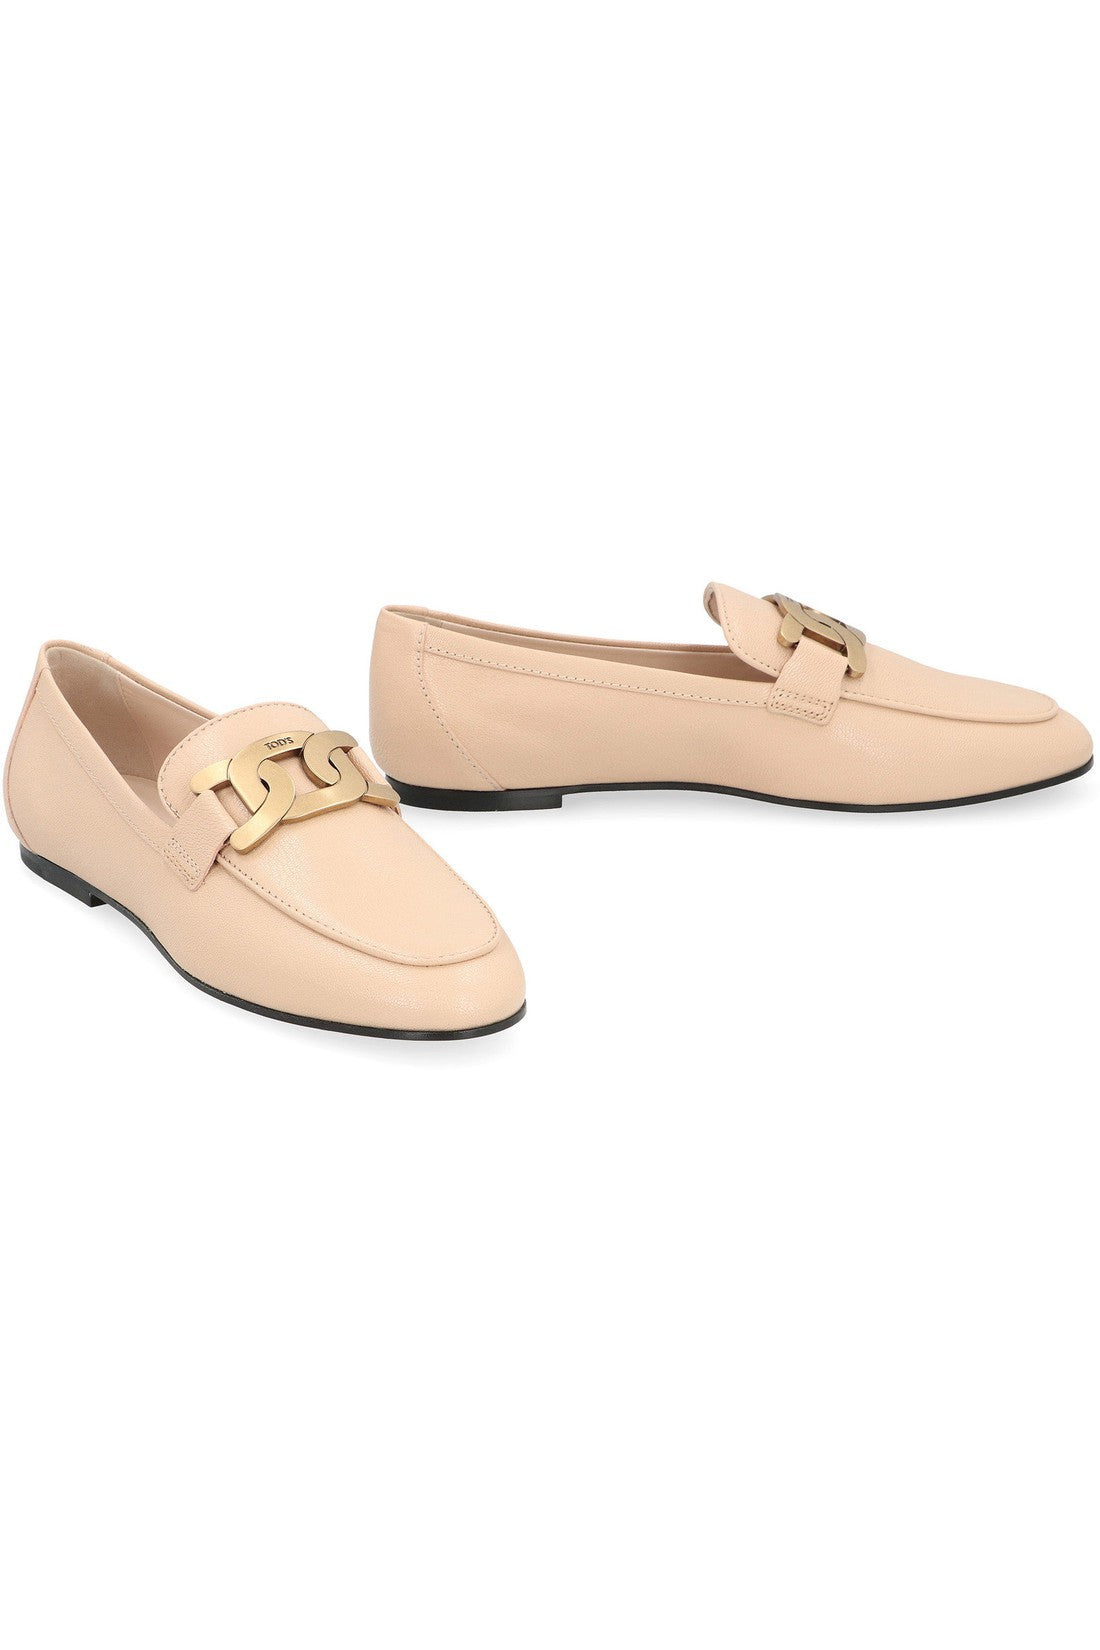 Tod's-OUTLET-SALE-Kate Leather loafers-ARCHIVIST